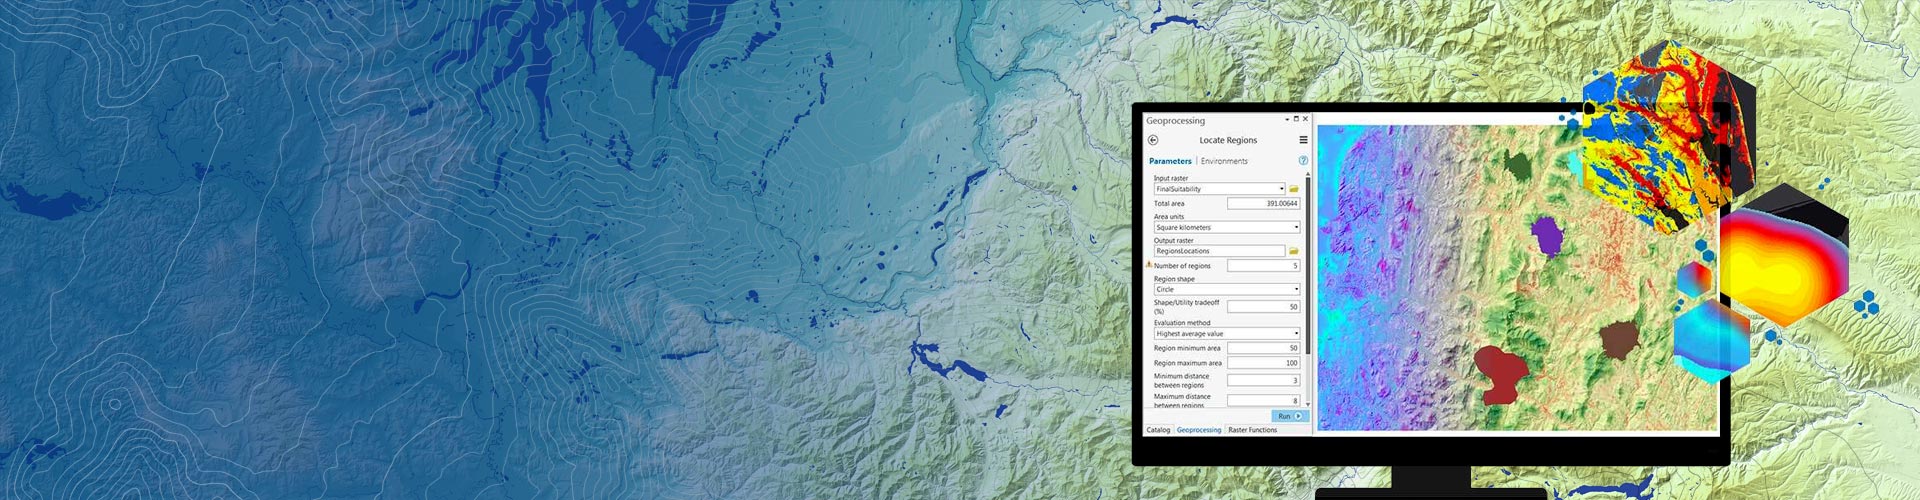 Explore the world of spatial analytics tools in ArcGIS Pro